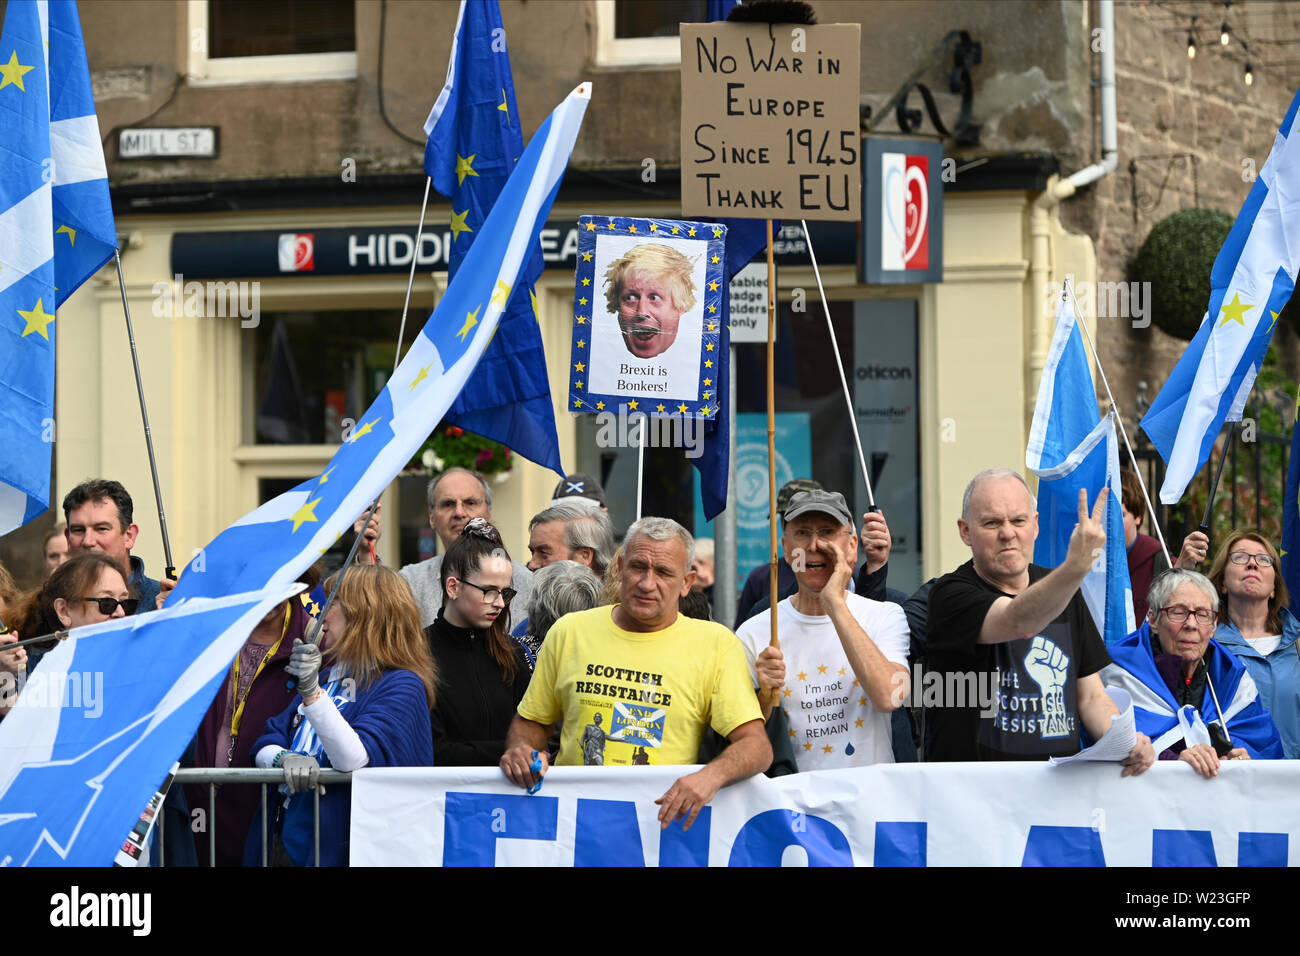 Perth, Scotland, United Kingdom. 05th July, 2019. Independence and Remain supporters protest outside Perth Concert Hall before Conservative Party leadership contenders Boris Johnson and Jeremy Hunt take part in one of a series of leadership election hustings for party members around the UK. Credit: Ken Jack/Alamy Live News Stock Photo